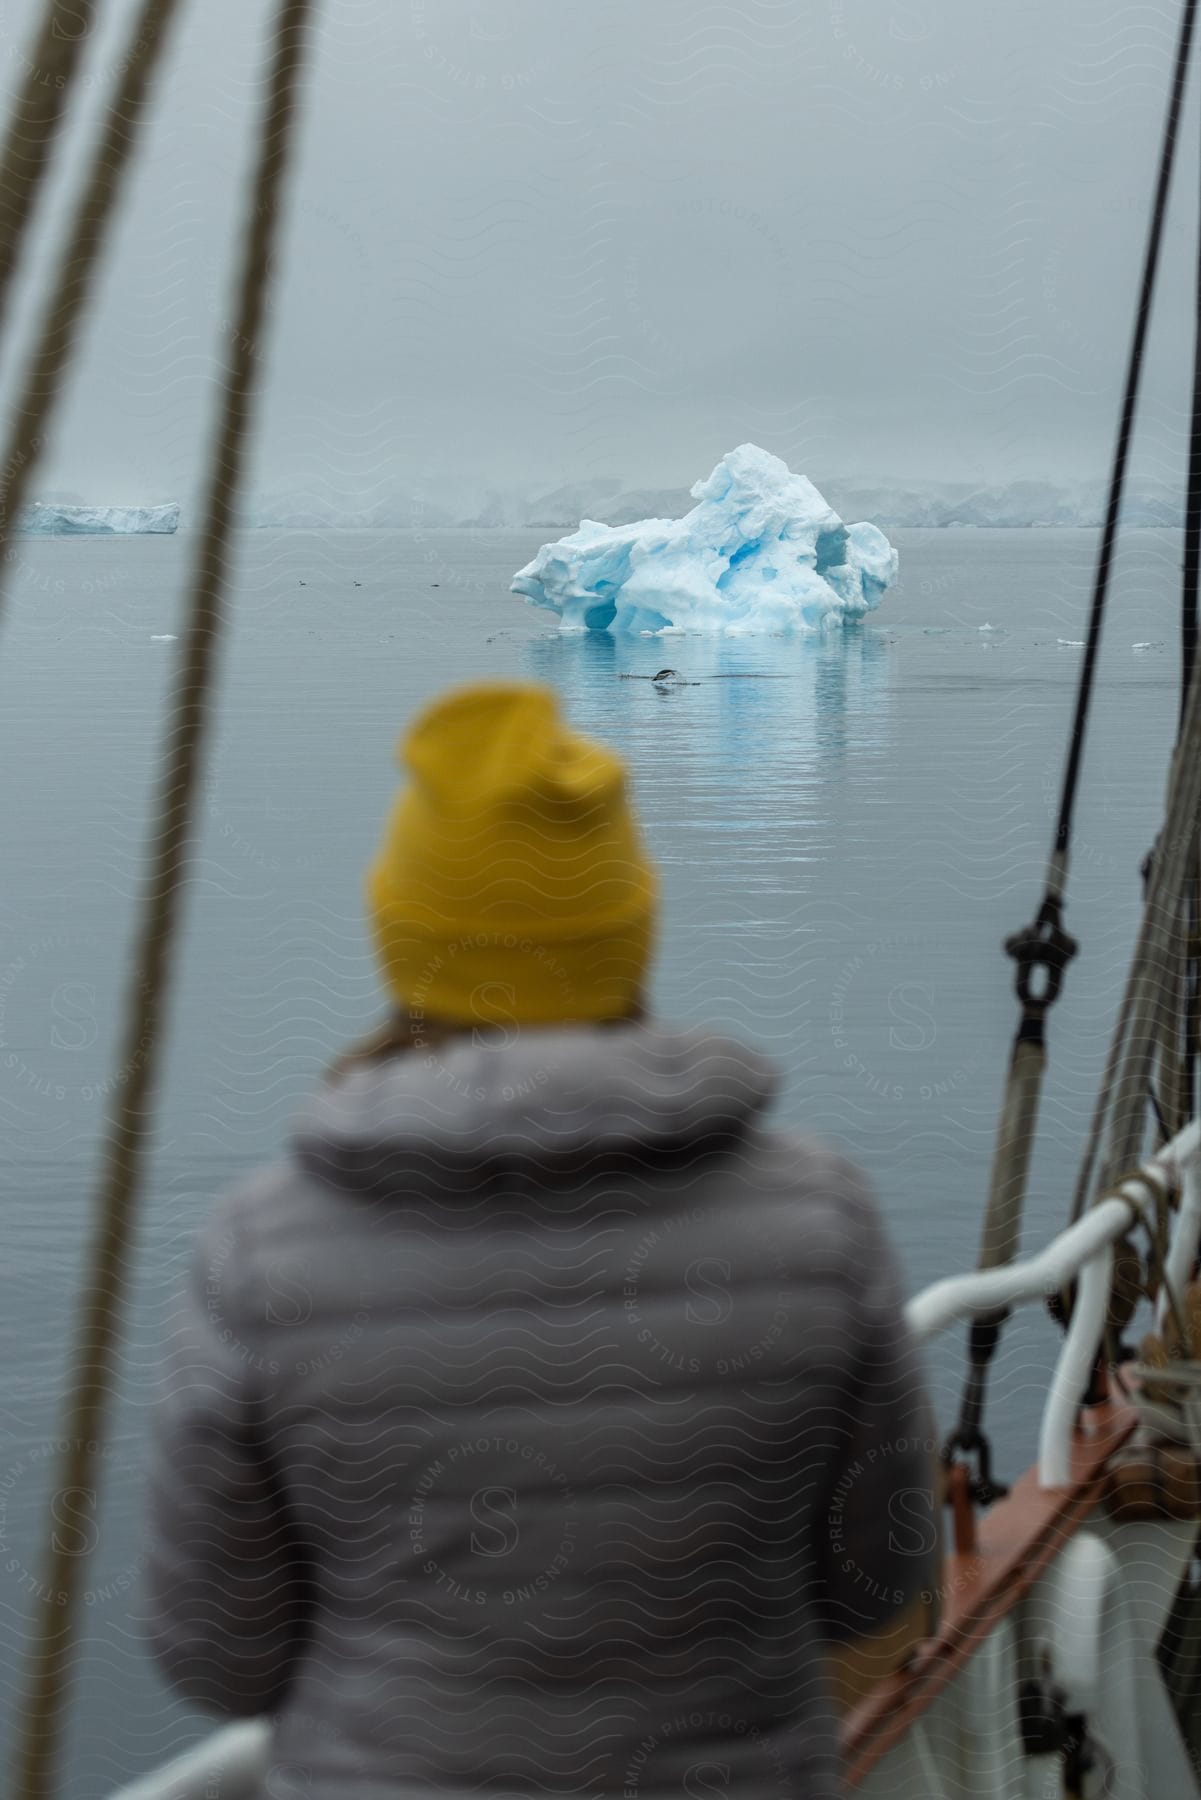 A woman wearing a yellow beanie is on a boat looking at the sea with a floating ice cap